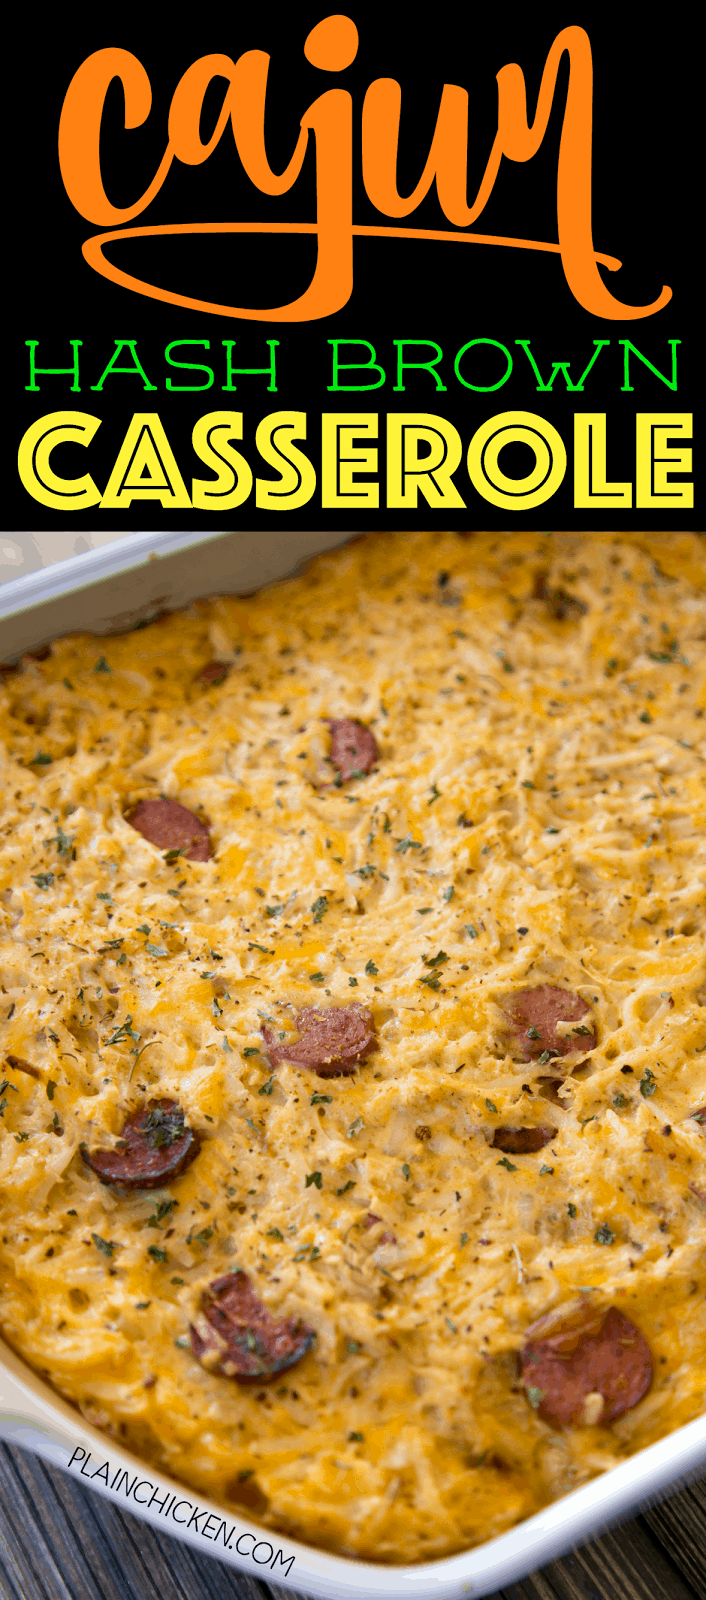 Cajun Hash Brown Casserole - cheesy hash brown casserole loaded with chicken and smoked sausage. Seriously DELICIOUS! We ate this three days in a row! OMG! Chicken, smoked sausage, cajun seasoning, cheddar cheese, hash browns, cream of chicken soup and sour cream. This is a family favorite! Makes a great freezer meal!